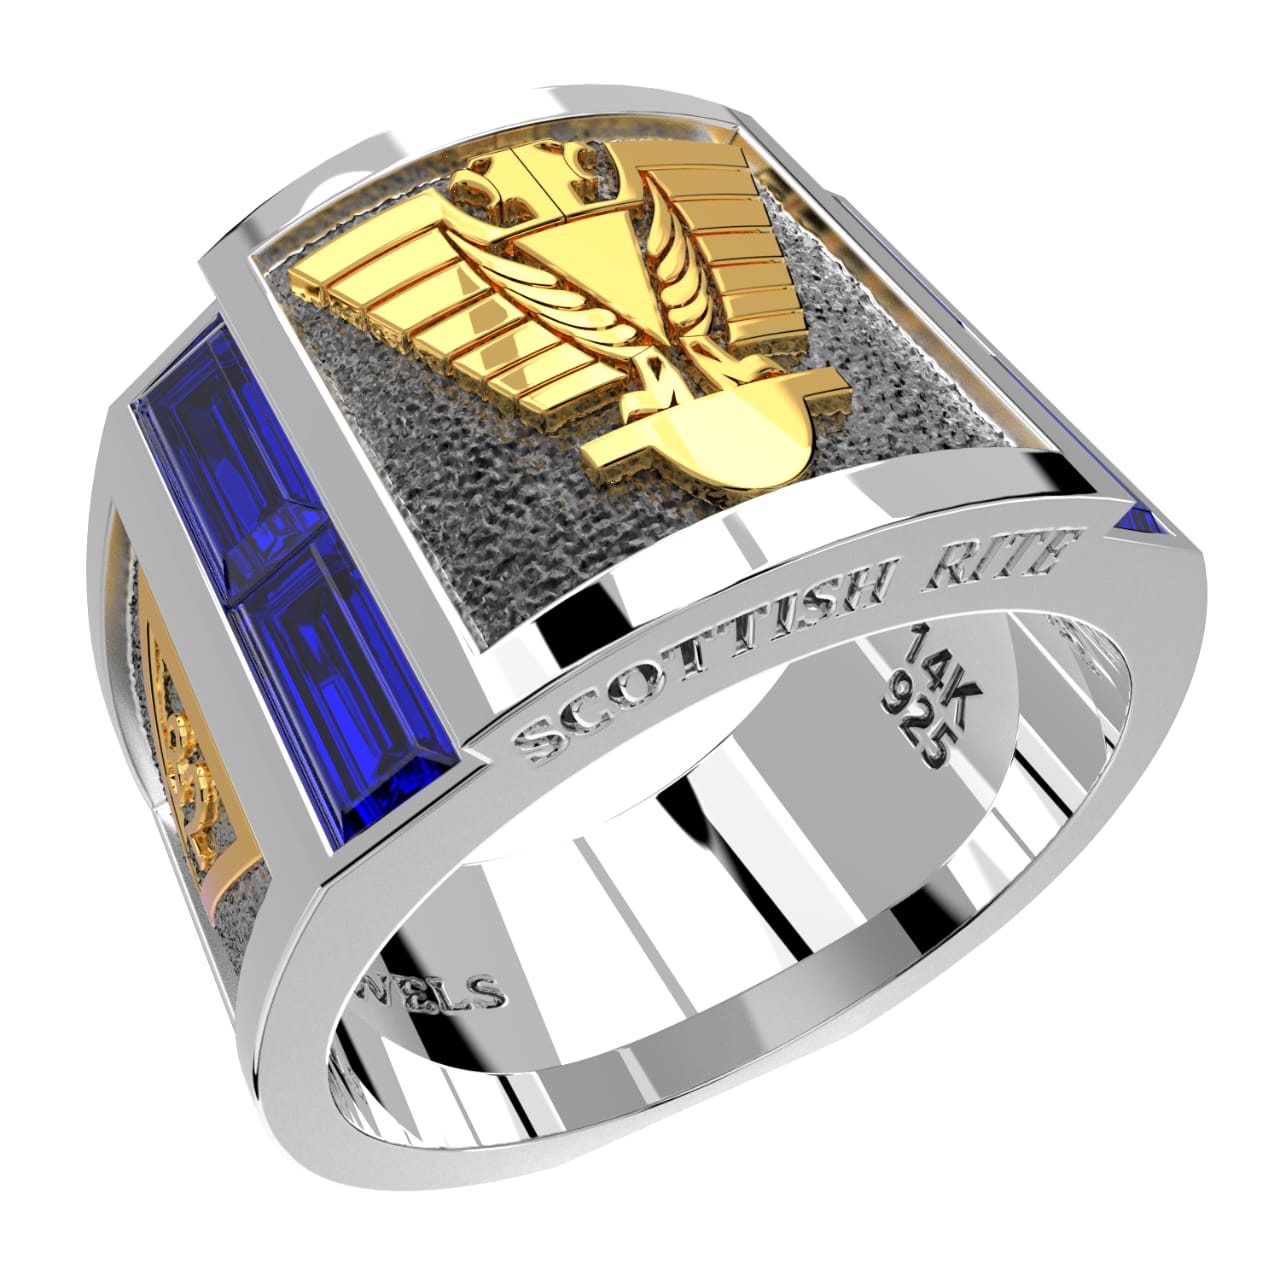 Men's Scottish Rite 925 Sterling Silver and 14k Yellow Gold Synthetic Sapphire Masonic Ring